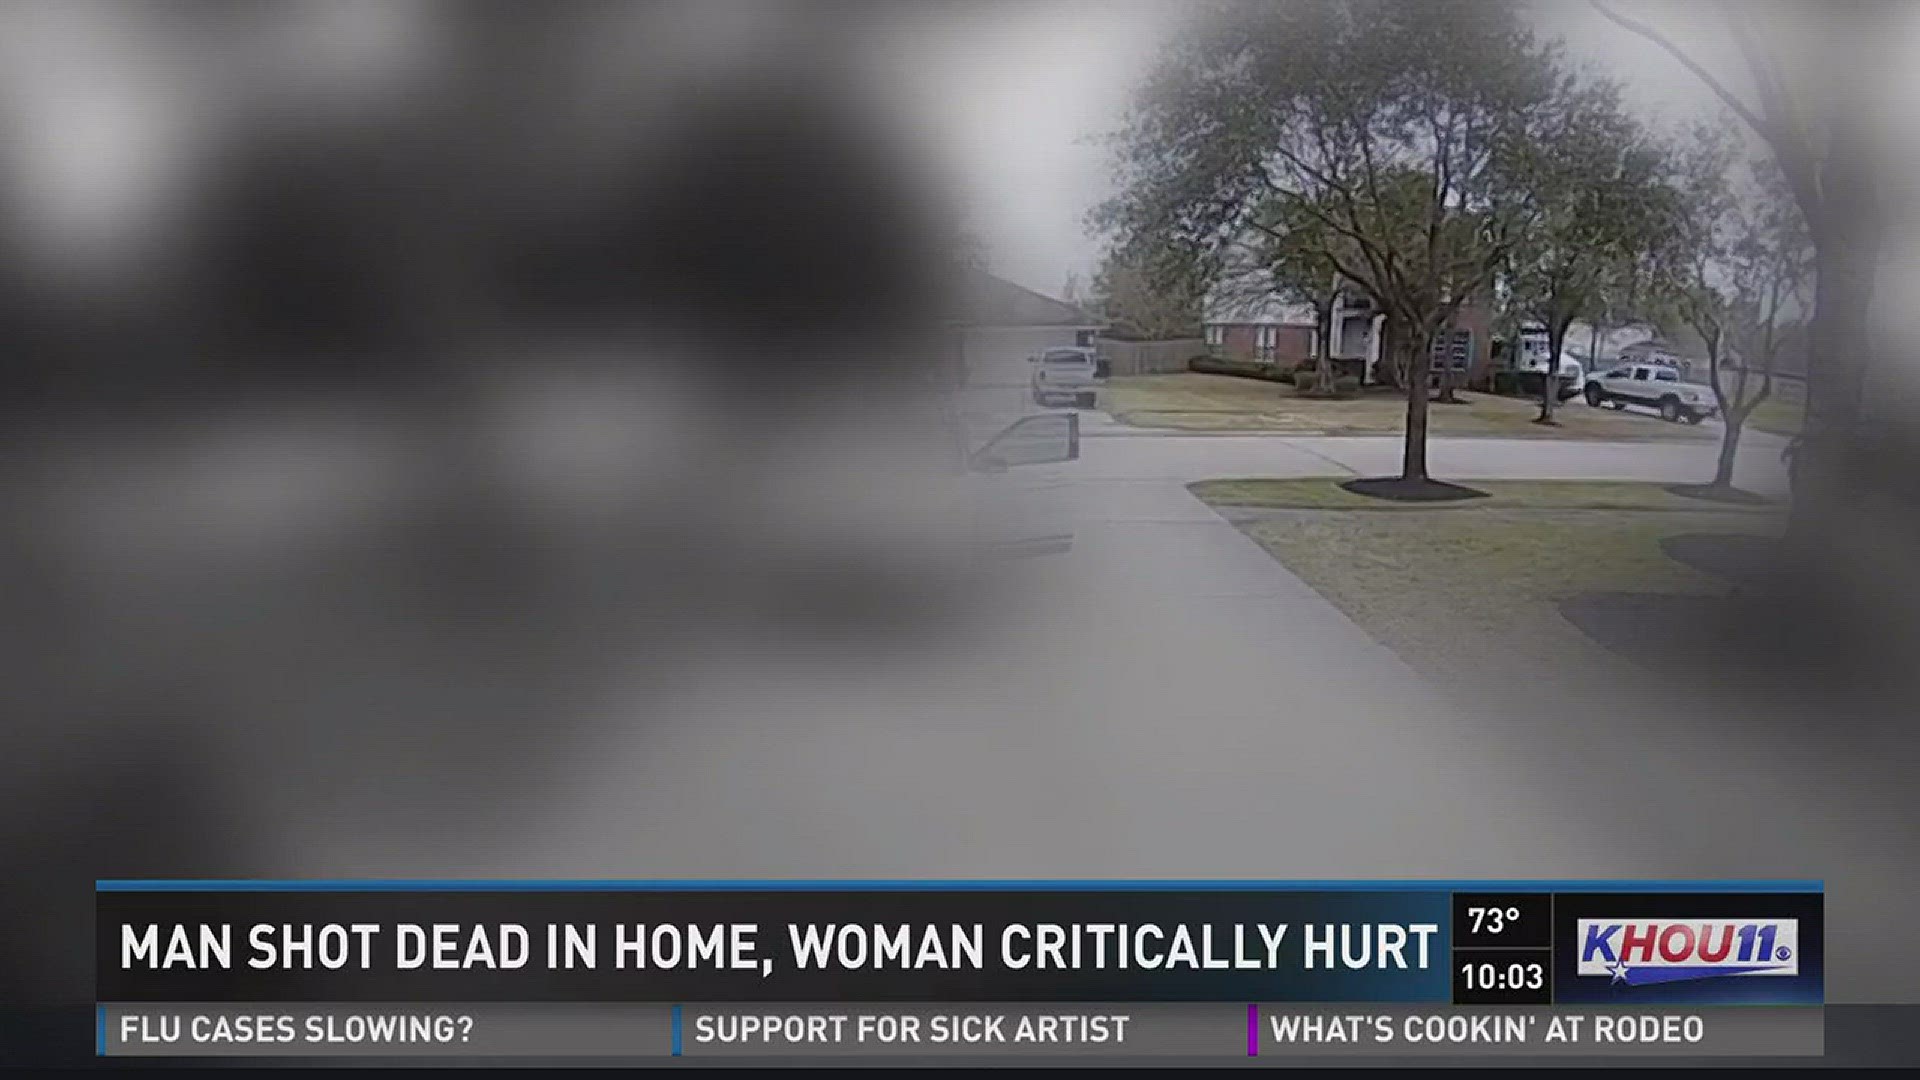 Home surveillance footage has been released where shots can be heard in a shooting that left a man dead and a woman critically injured in Cypress on Saturday.